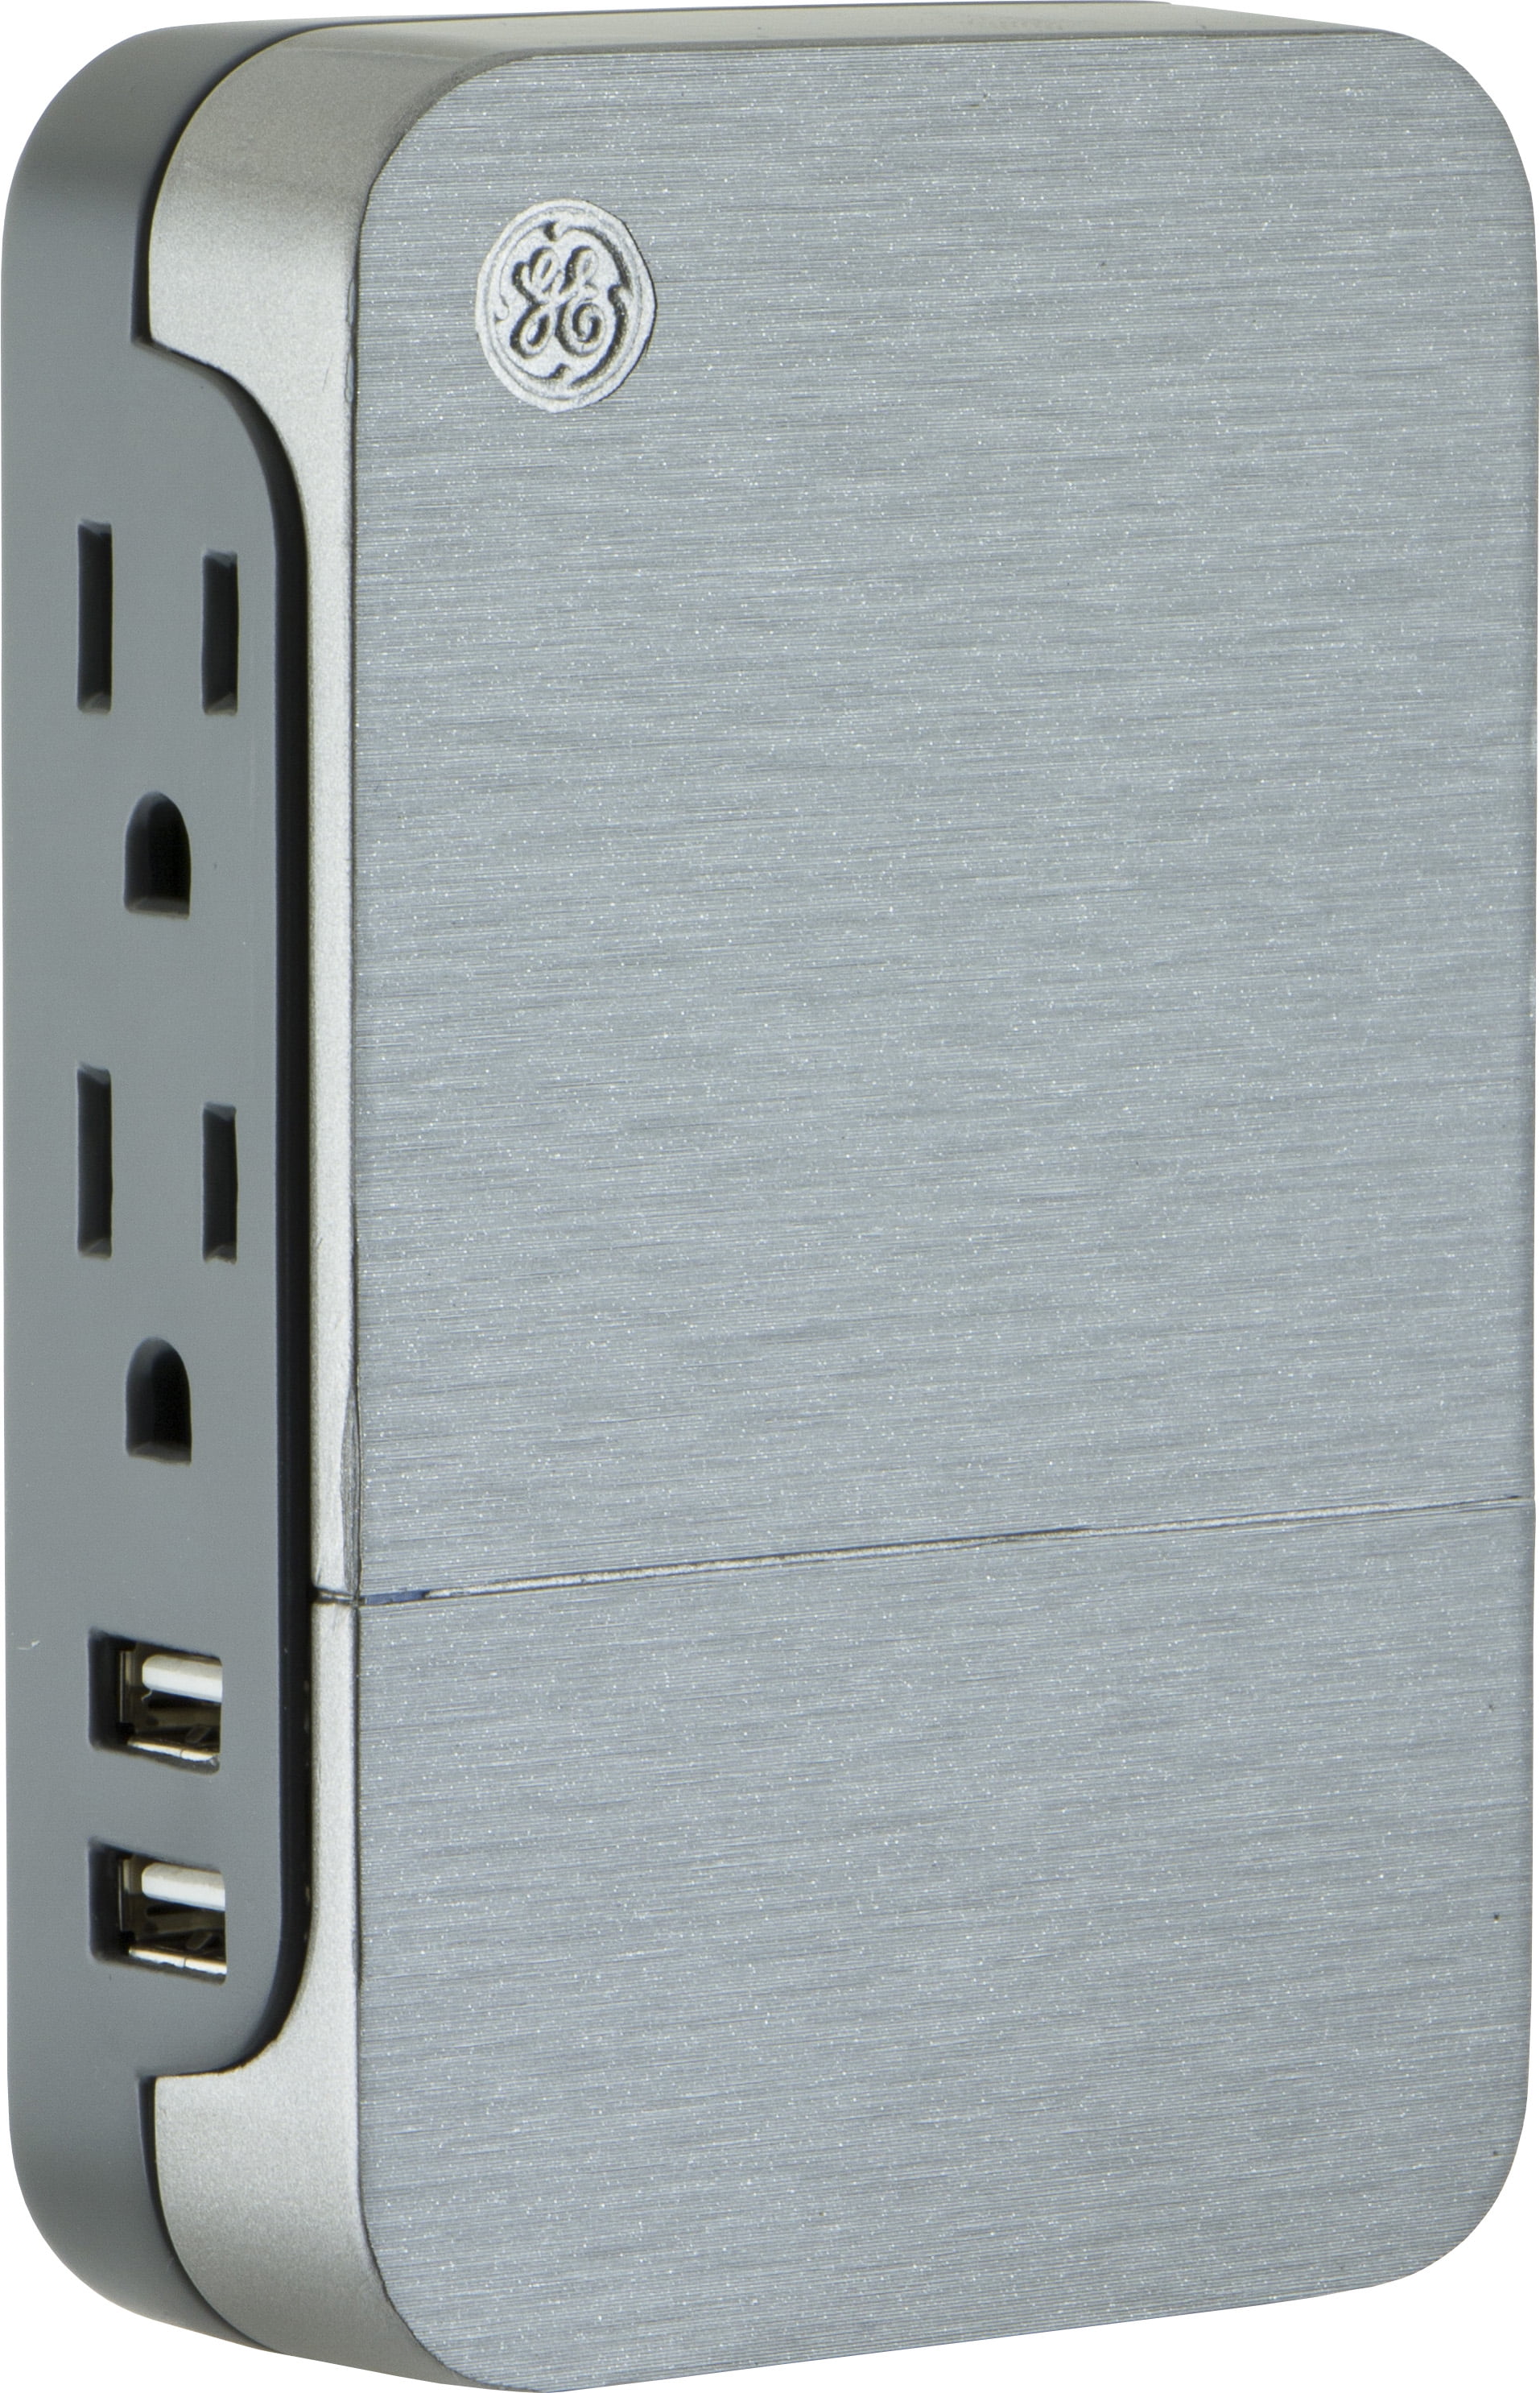 Side Access White Finish Wall Charger 2 USB Ports 38314 GE USB Charging Surge Protector Fast Charge 2.4A 560 Joules Protection Rating 5 Outlet 